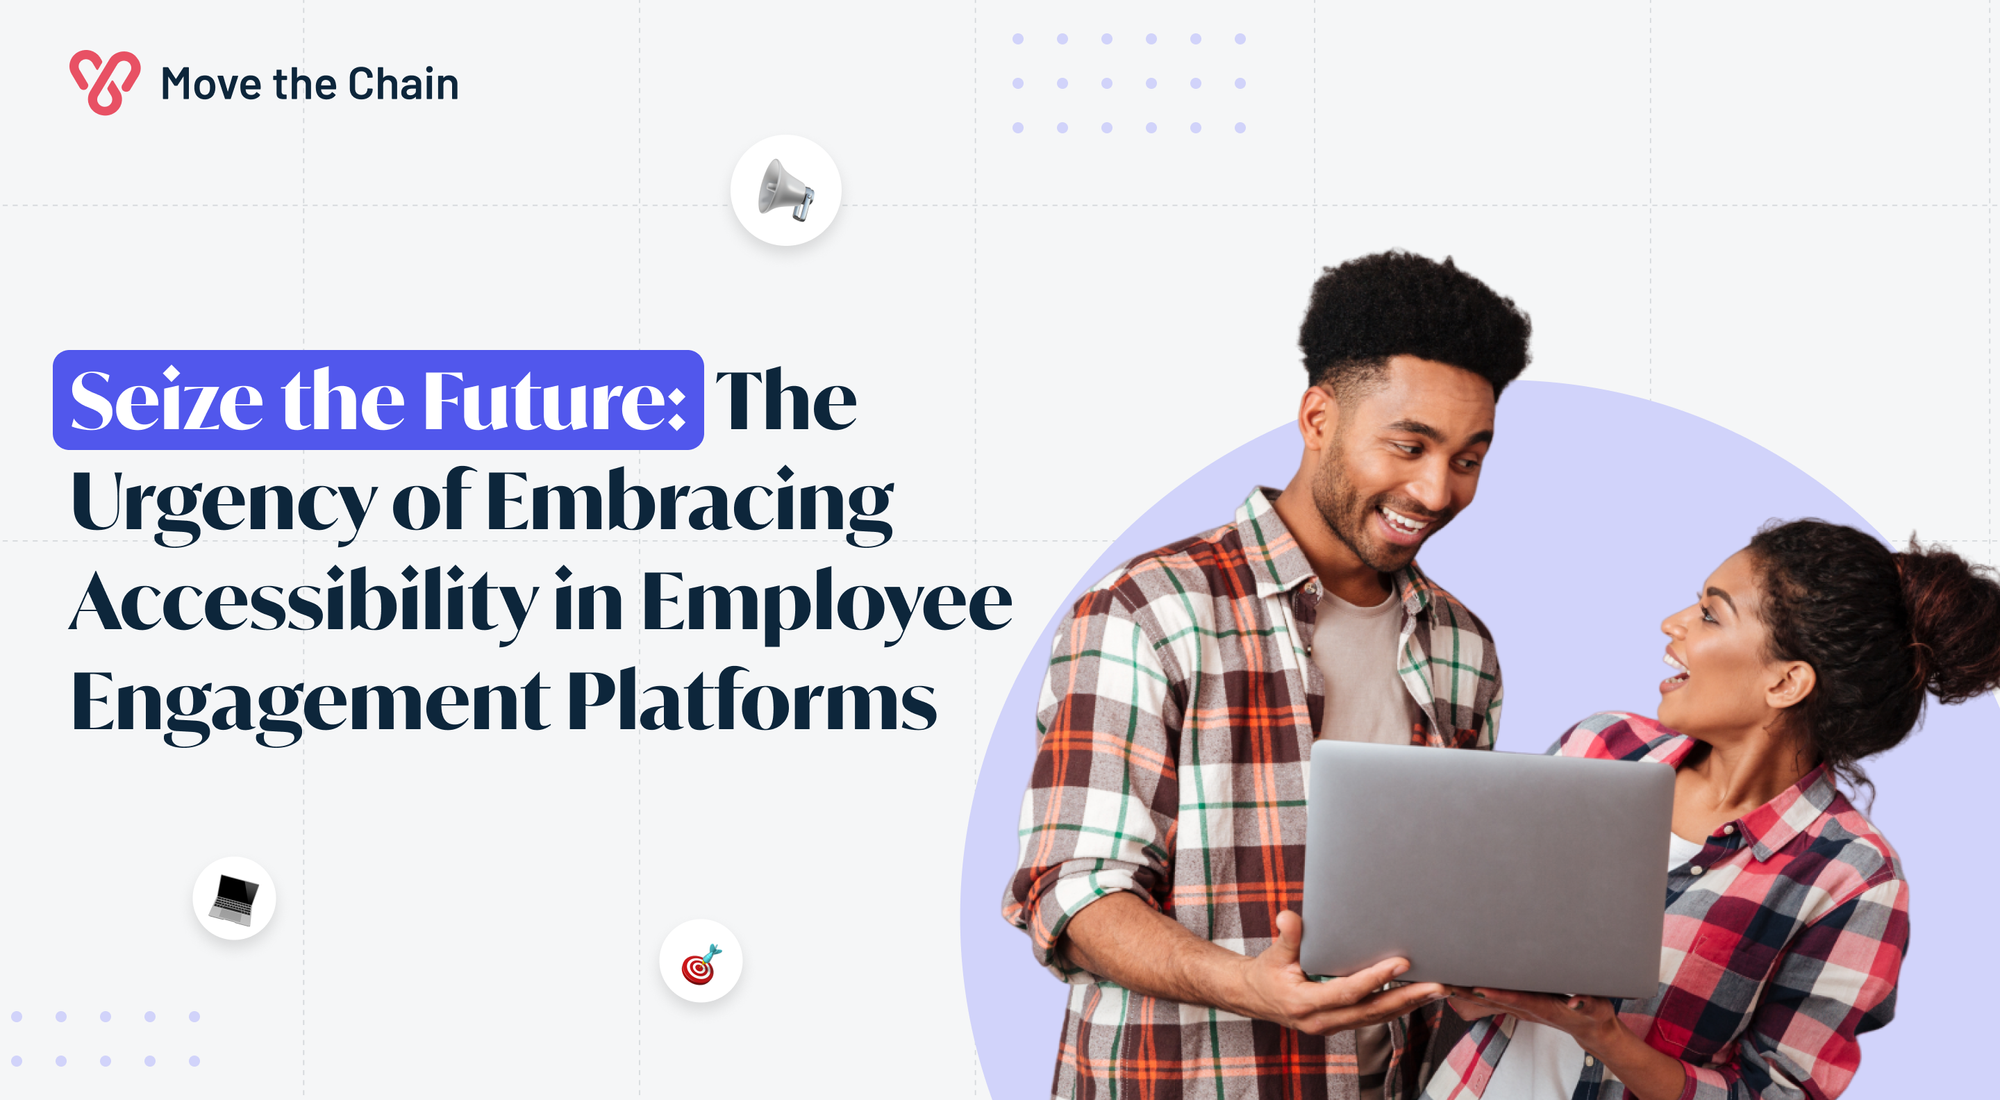 Seize the Future: The Urgency of Embracing Accessibility in Employee Engagement Platforms